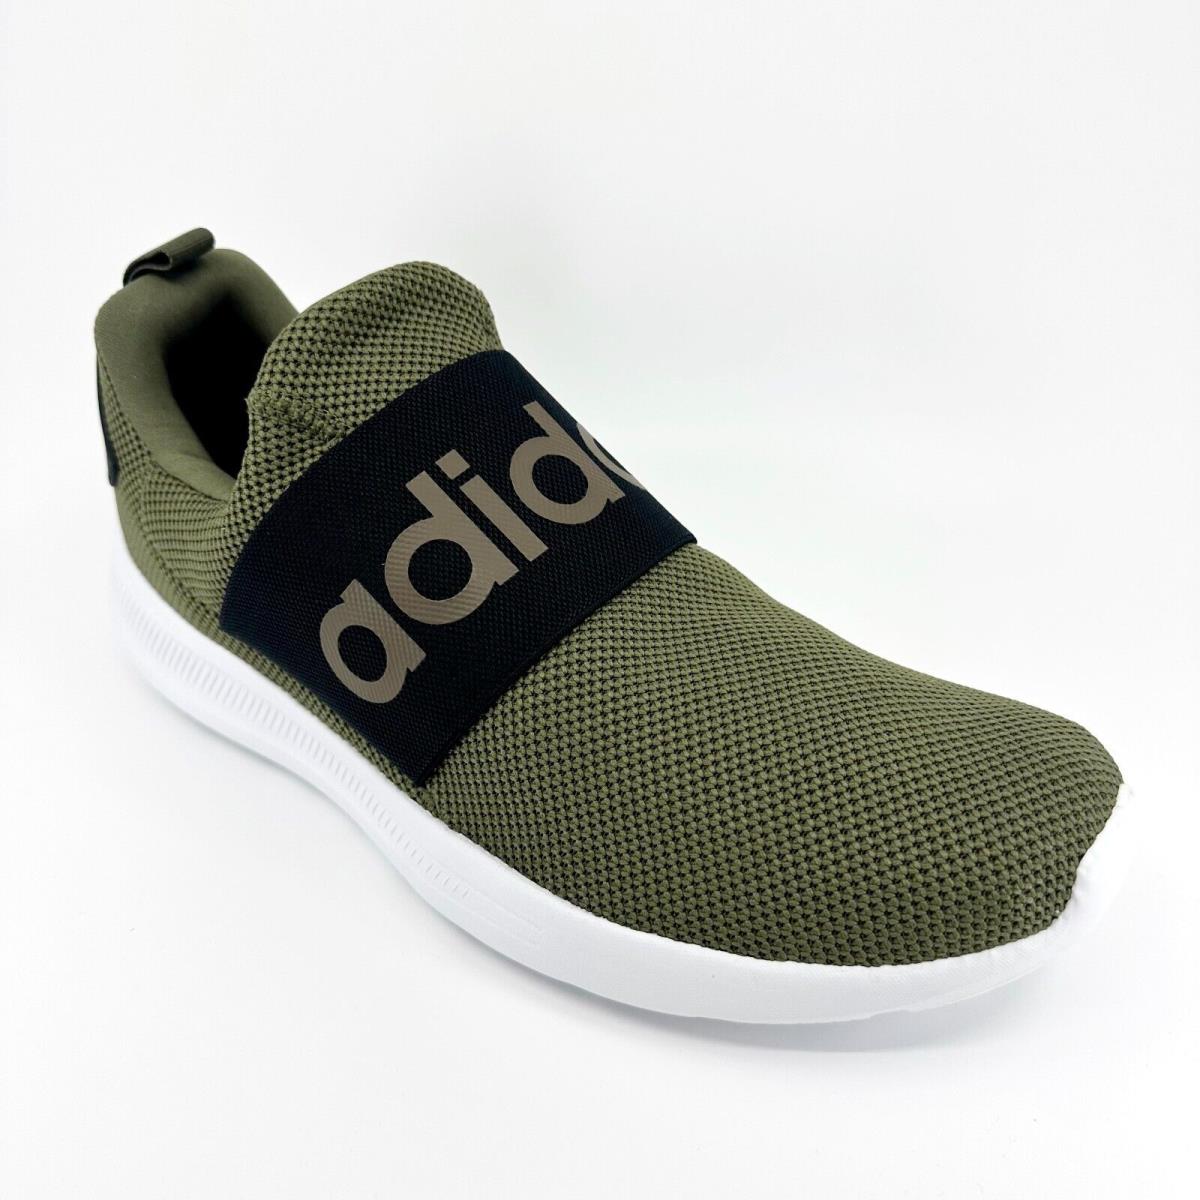 Adidas shoes Lite Racer - Green 0